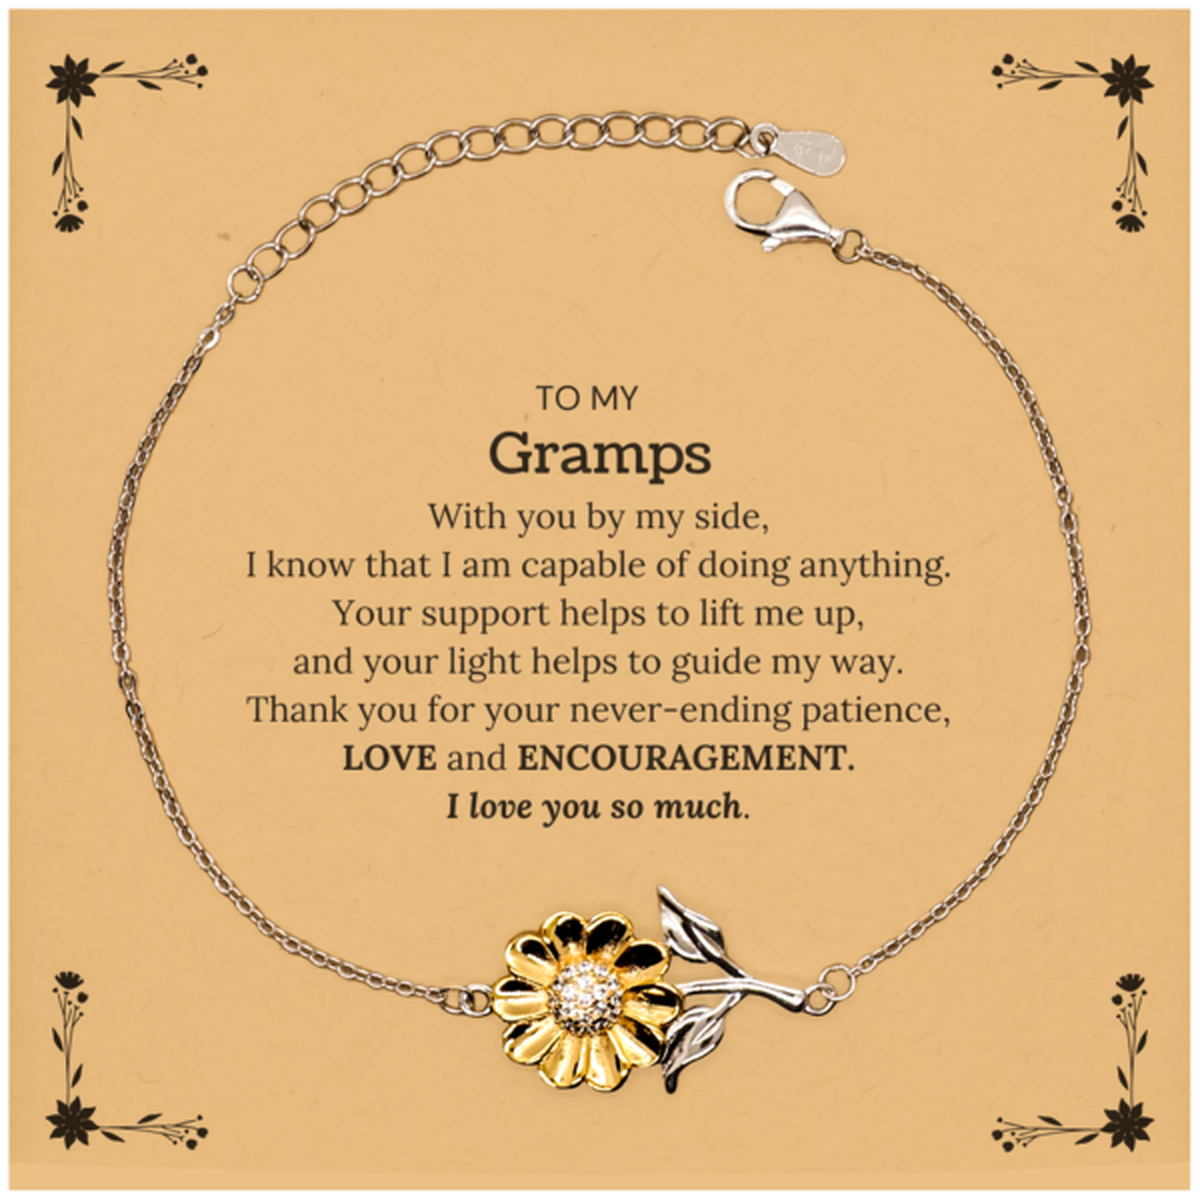 Appreciation Gramps Sunflower Bracelet Gifts, To My Gramps Birthday Christmas Wedding Keepsake Gifts for Gramps With you by my side, I know that I am capable of doing anything. I love you so much